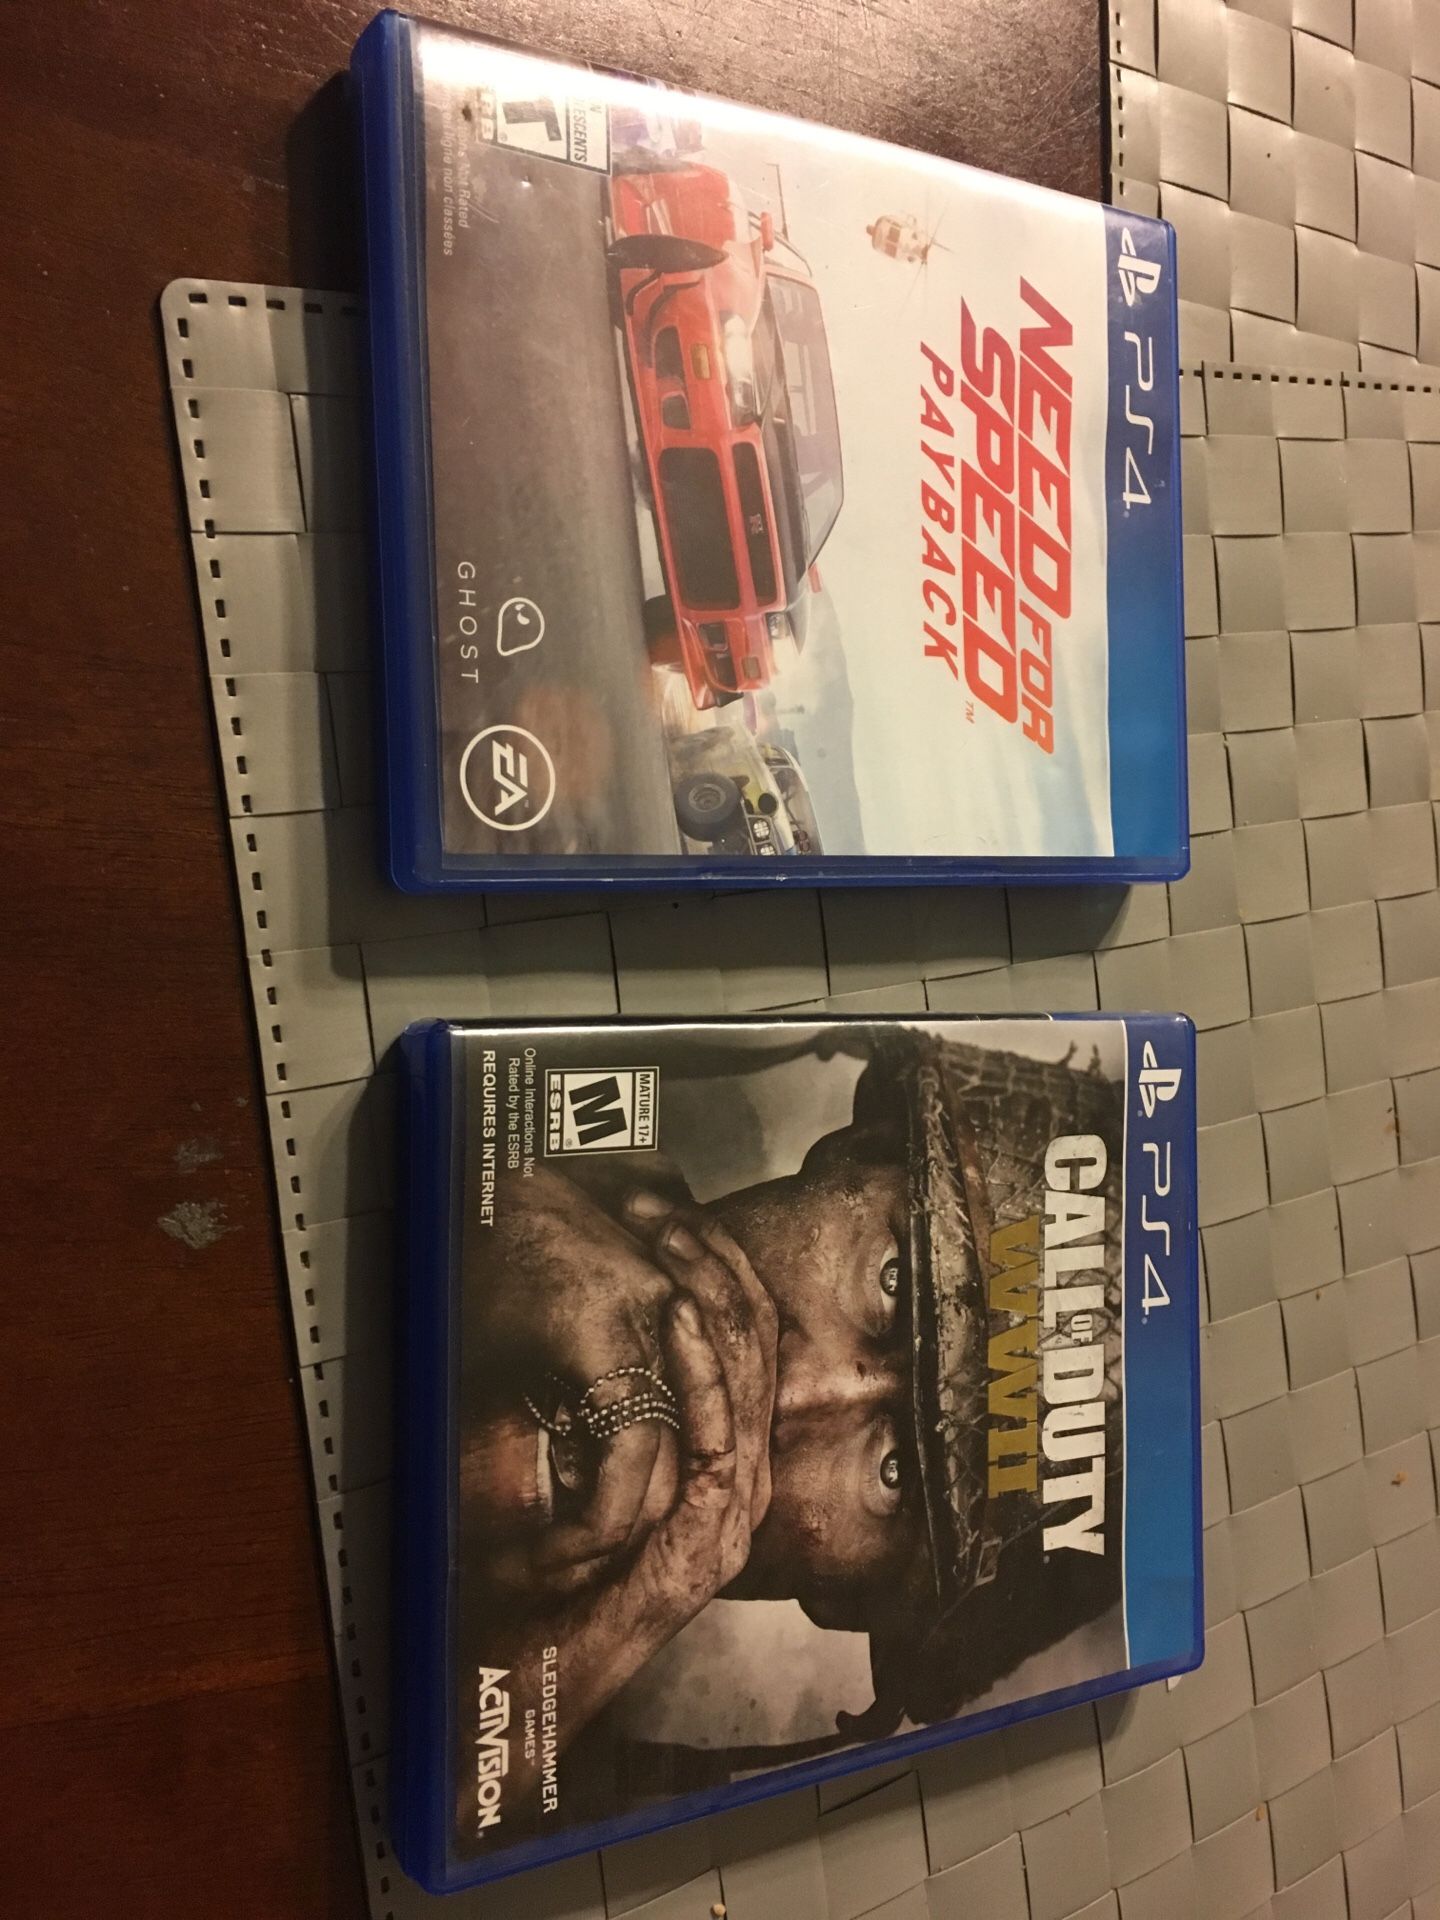 PS4 call of duty WW2 and NEED FOR SPEED payback